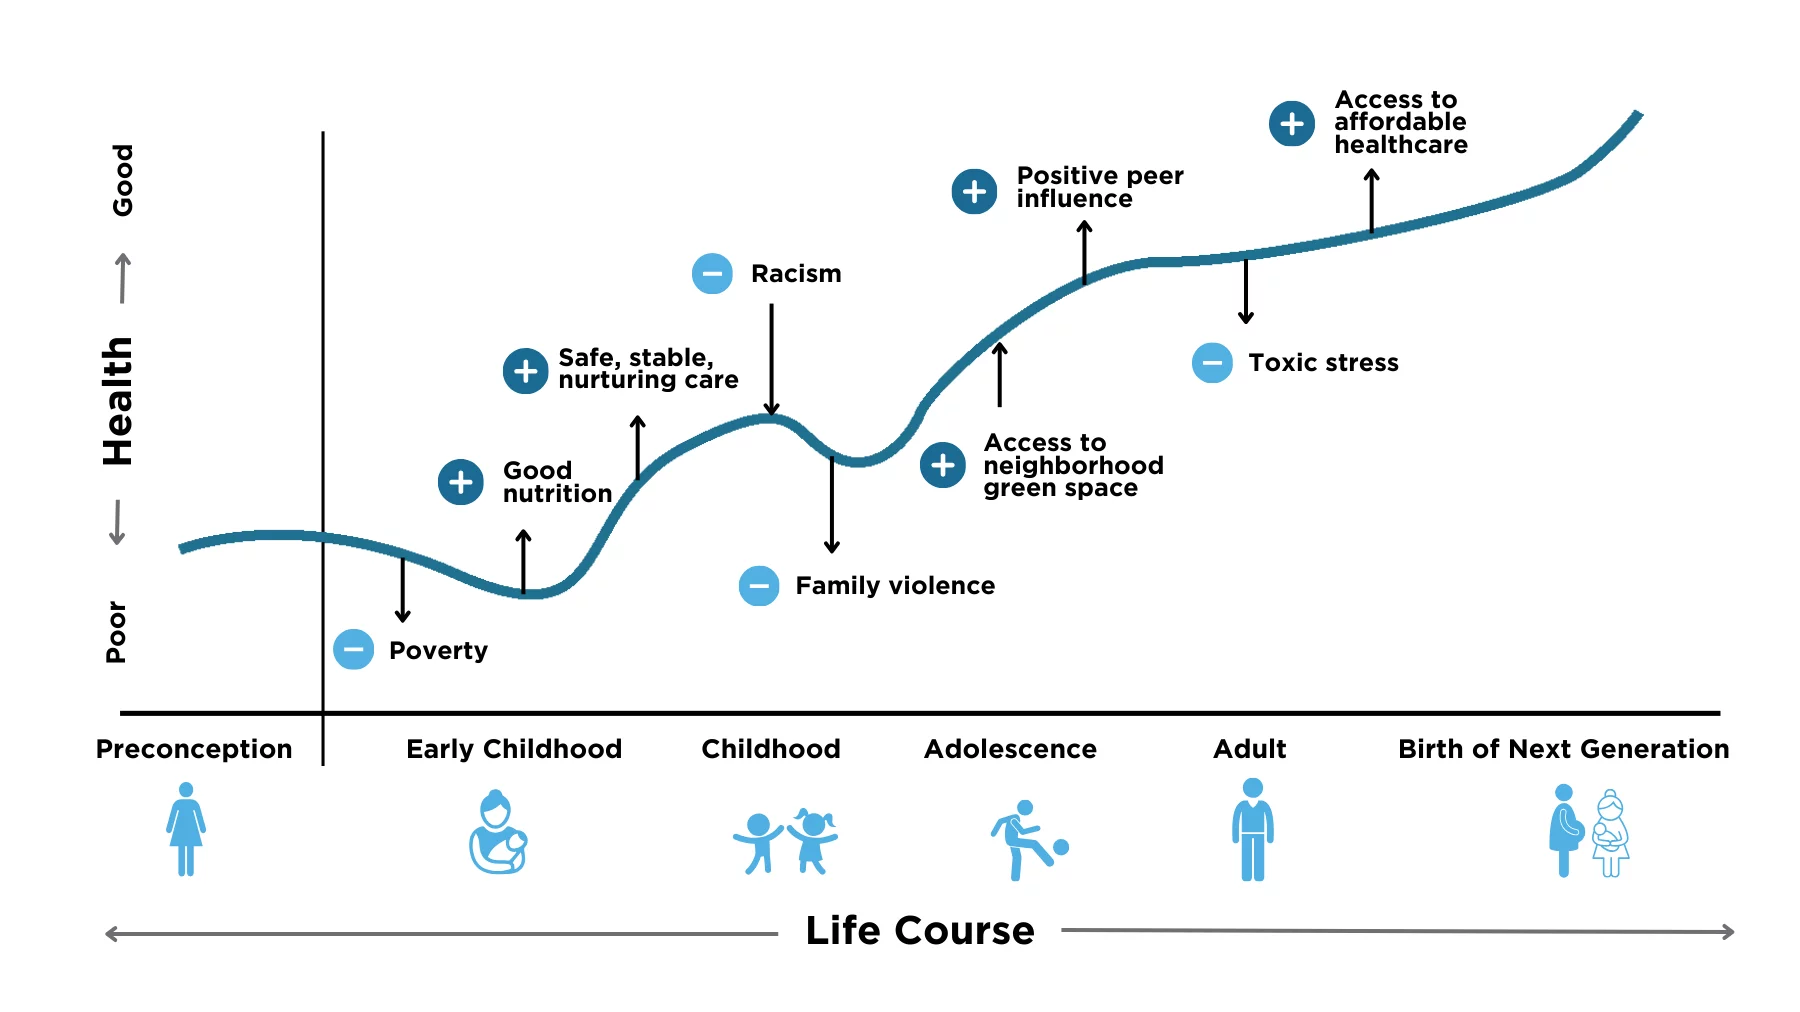 Line chart showing how certain factors improve or harm a life course health trajectory.